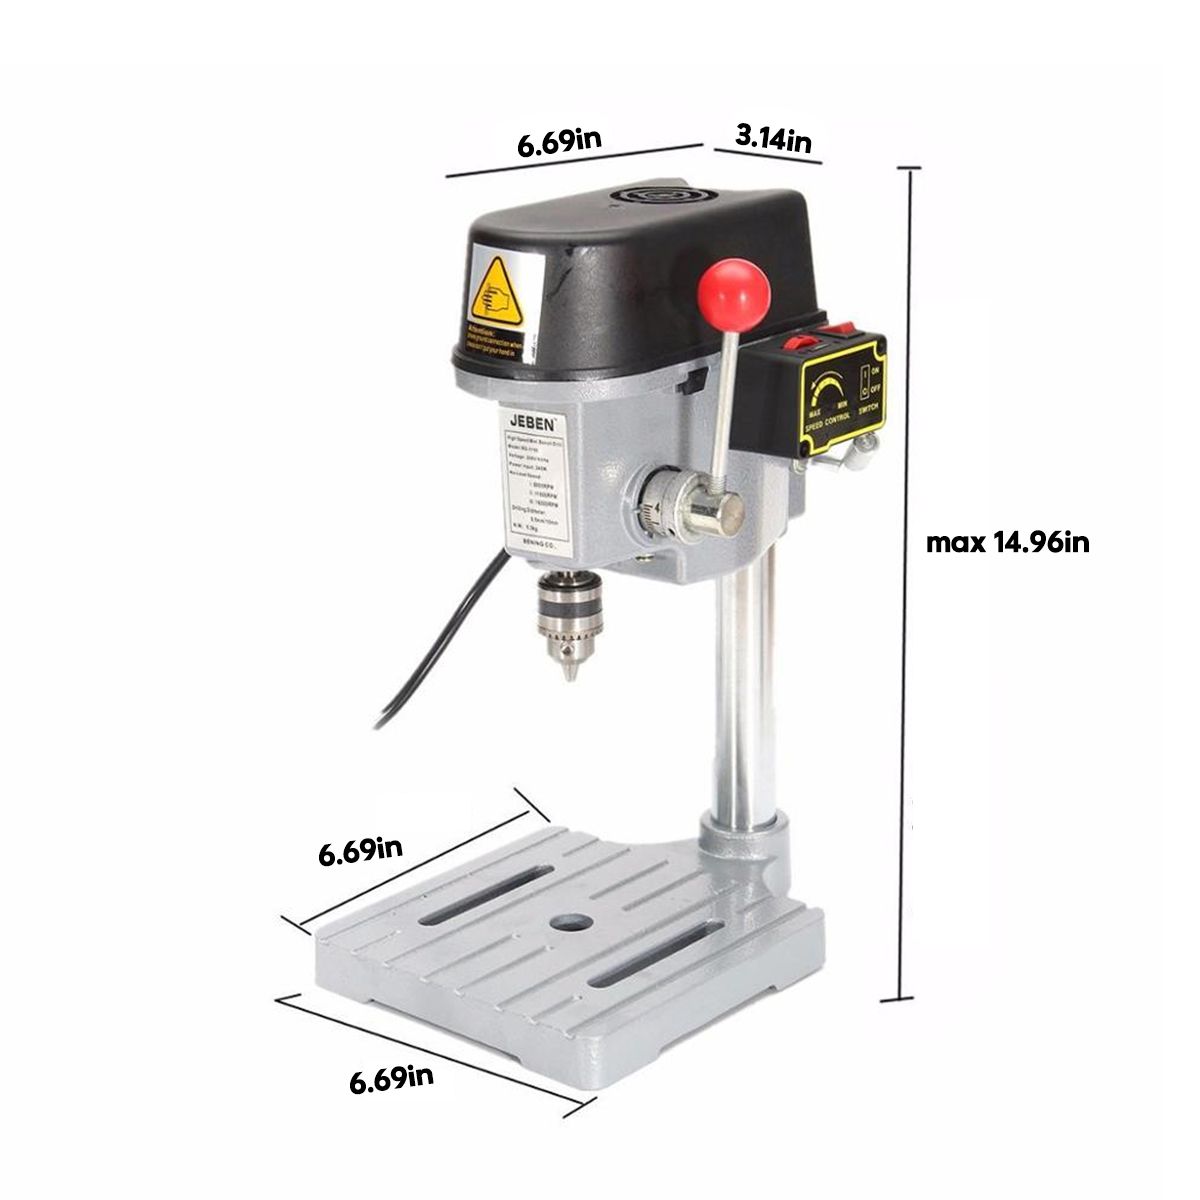 150W-Electric-Bench-Drill-Compact-variable-speed-Bench-mini-hobby-0--7000-rpm-Drill-Press-1764458